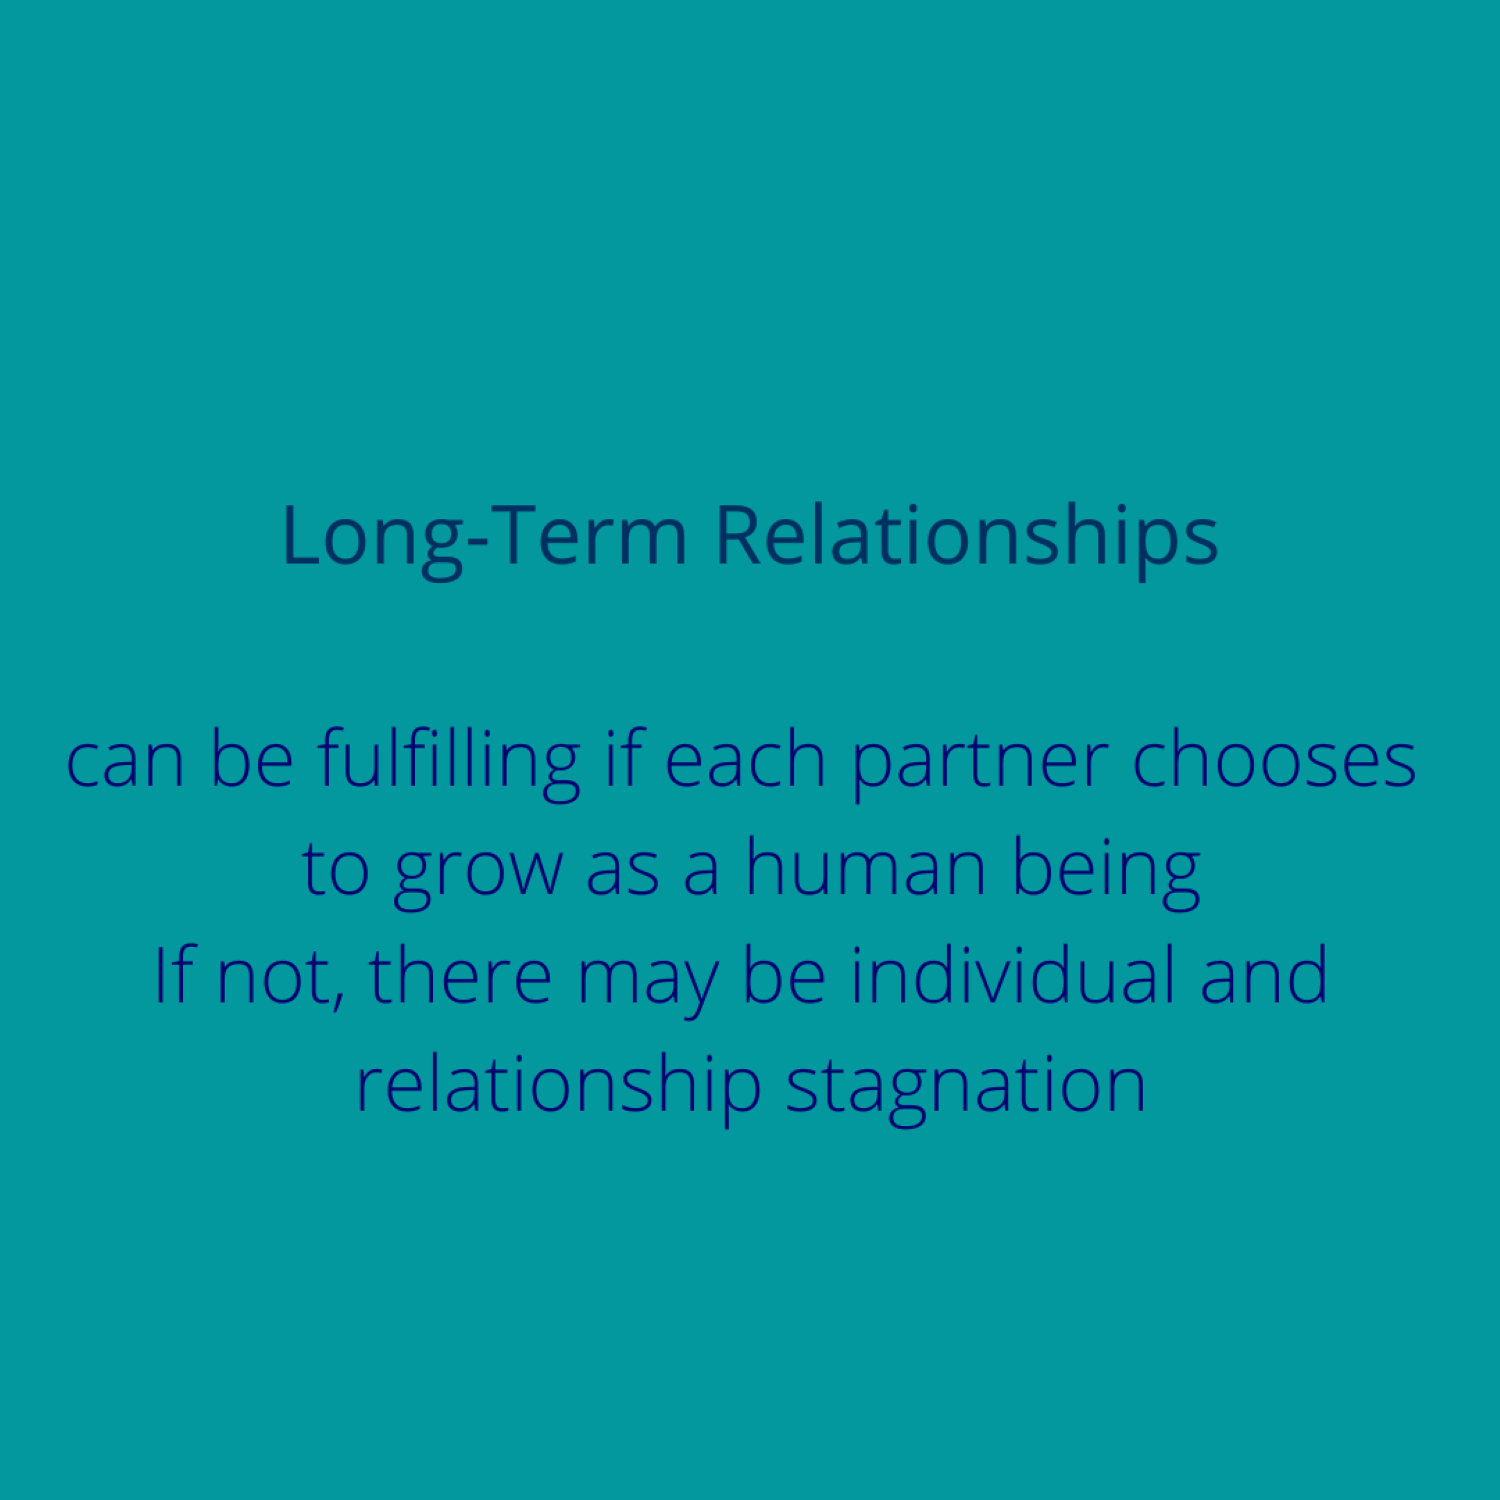 Gallery Photo of Long-term relationships are bound to struggle unless each partner learns to live in awareness.